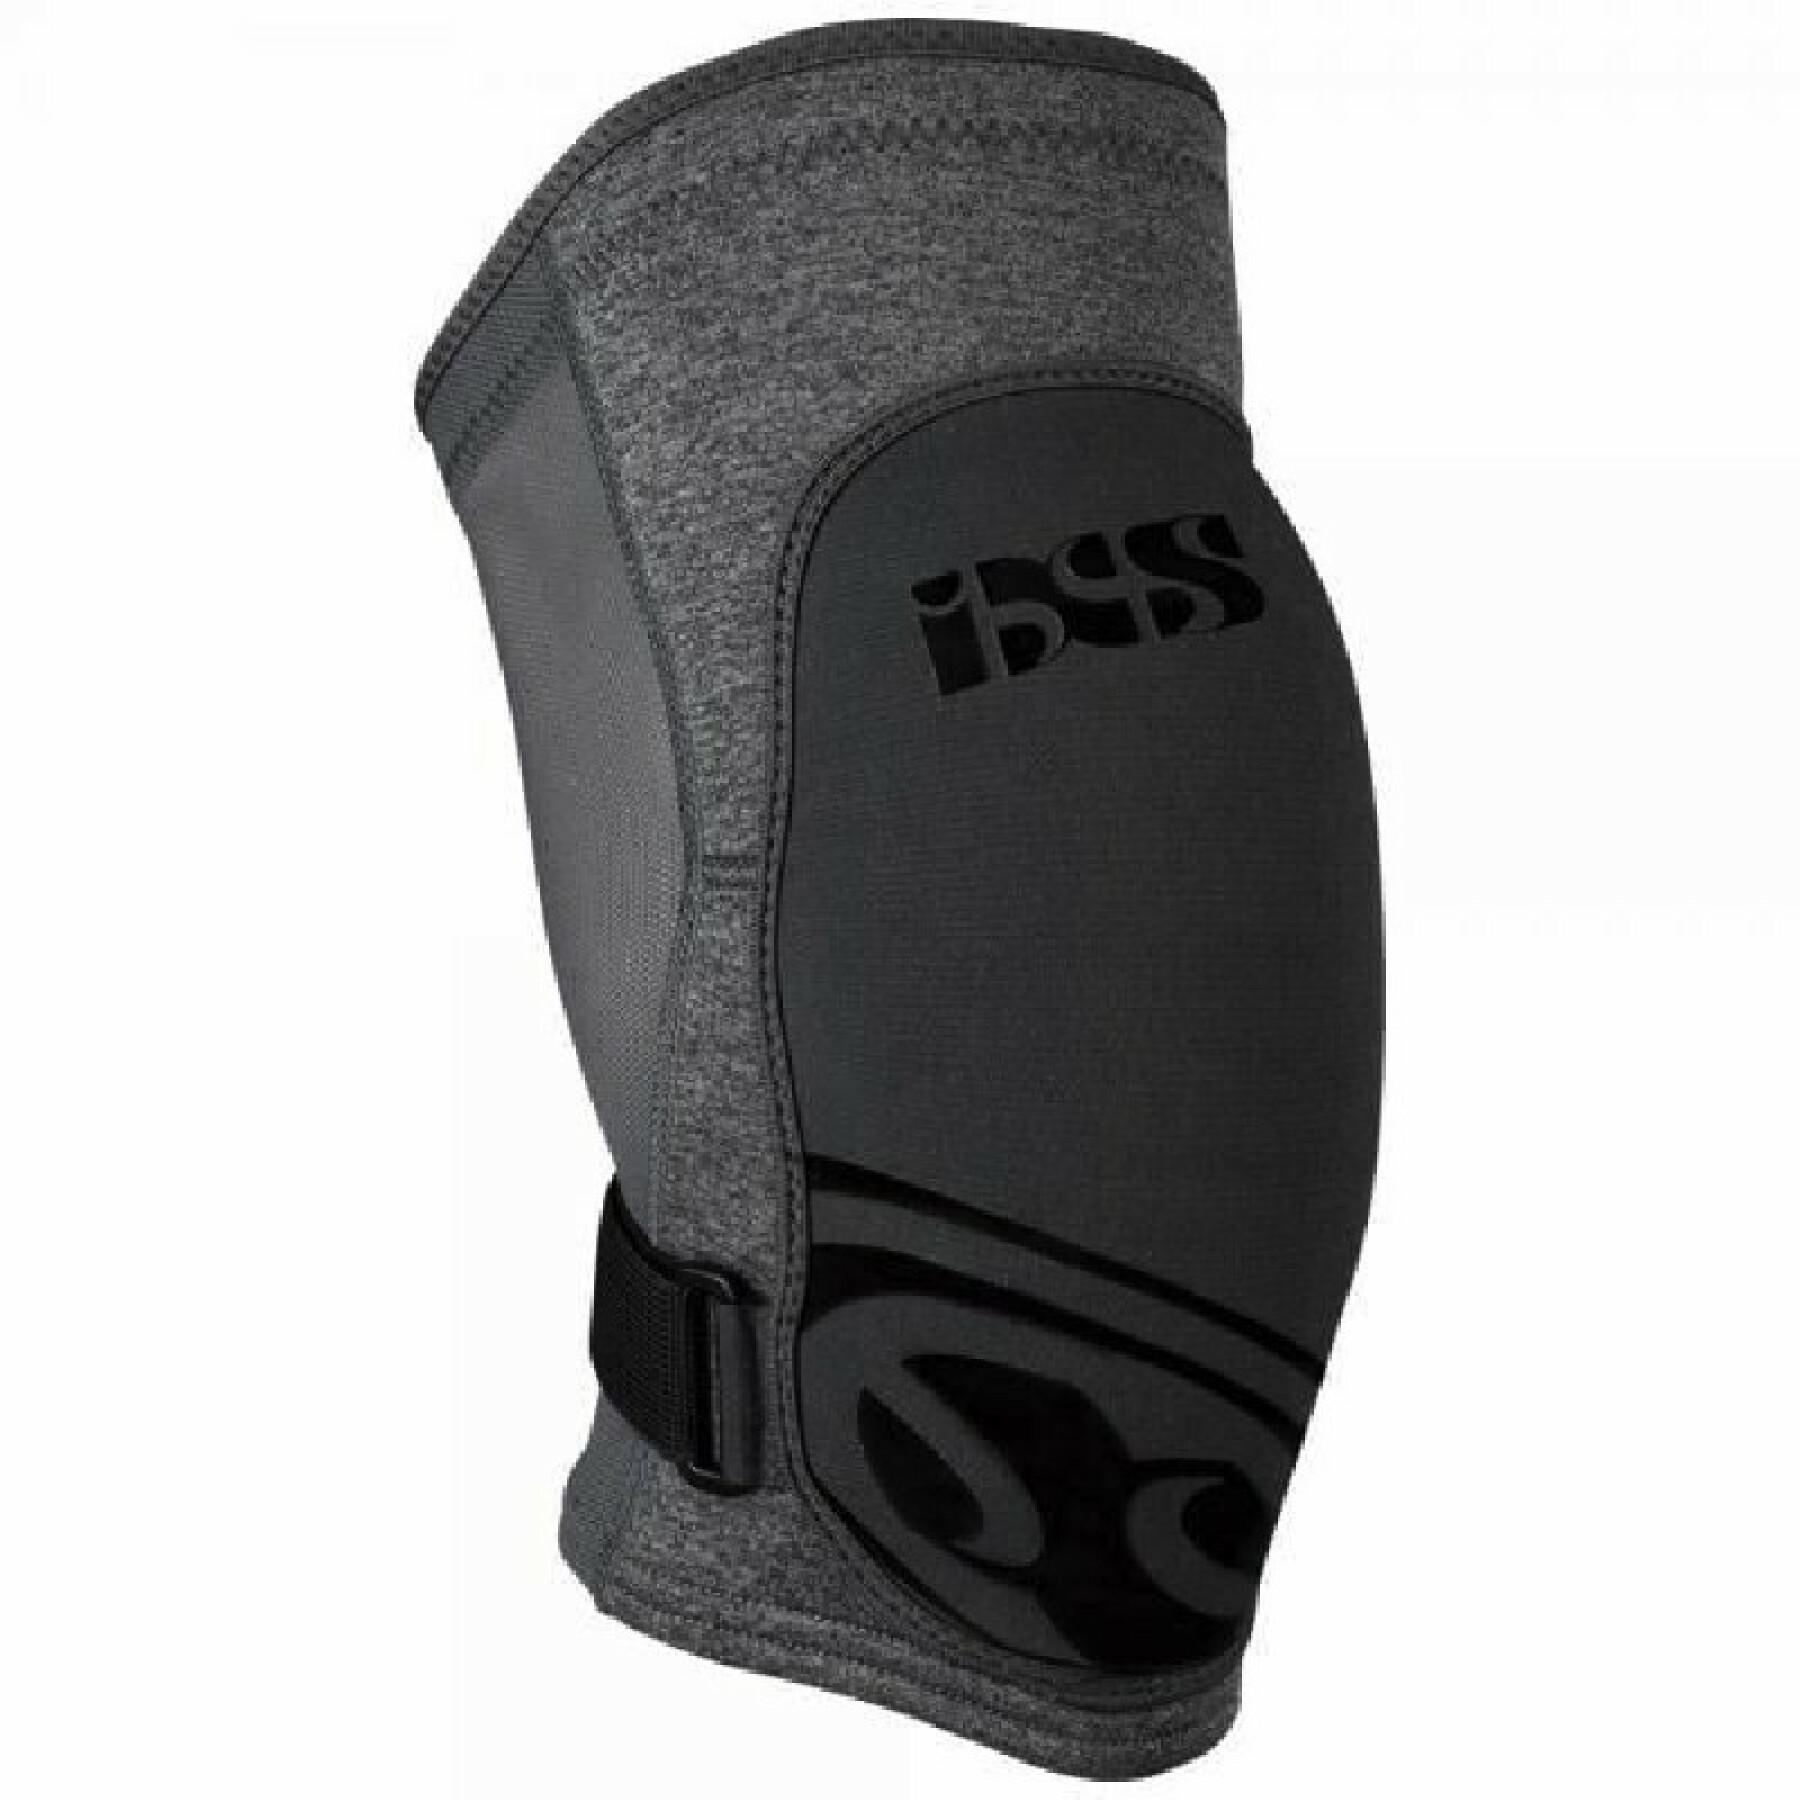 Knee protection for bicycles IXS Flow Evo+